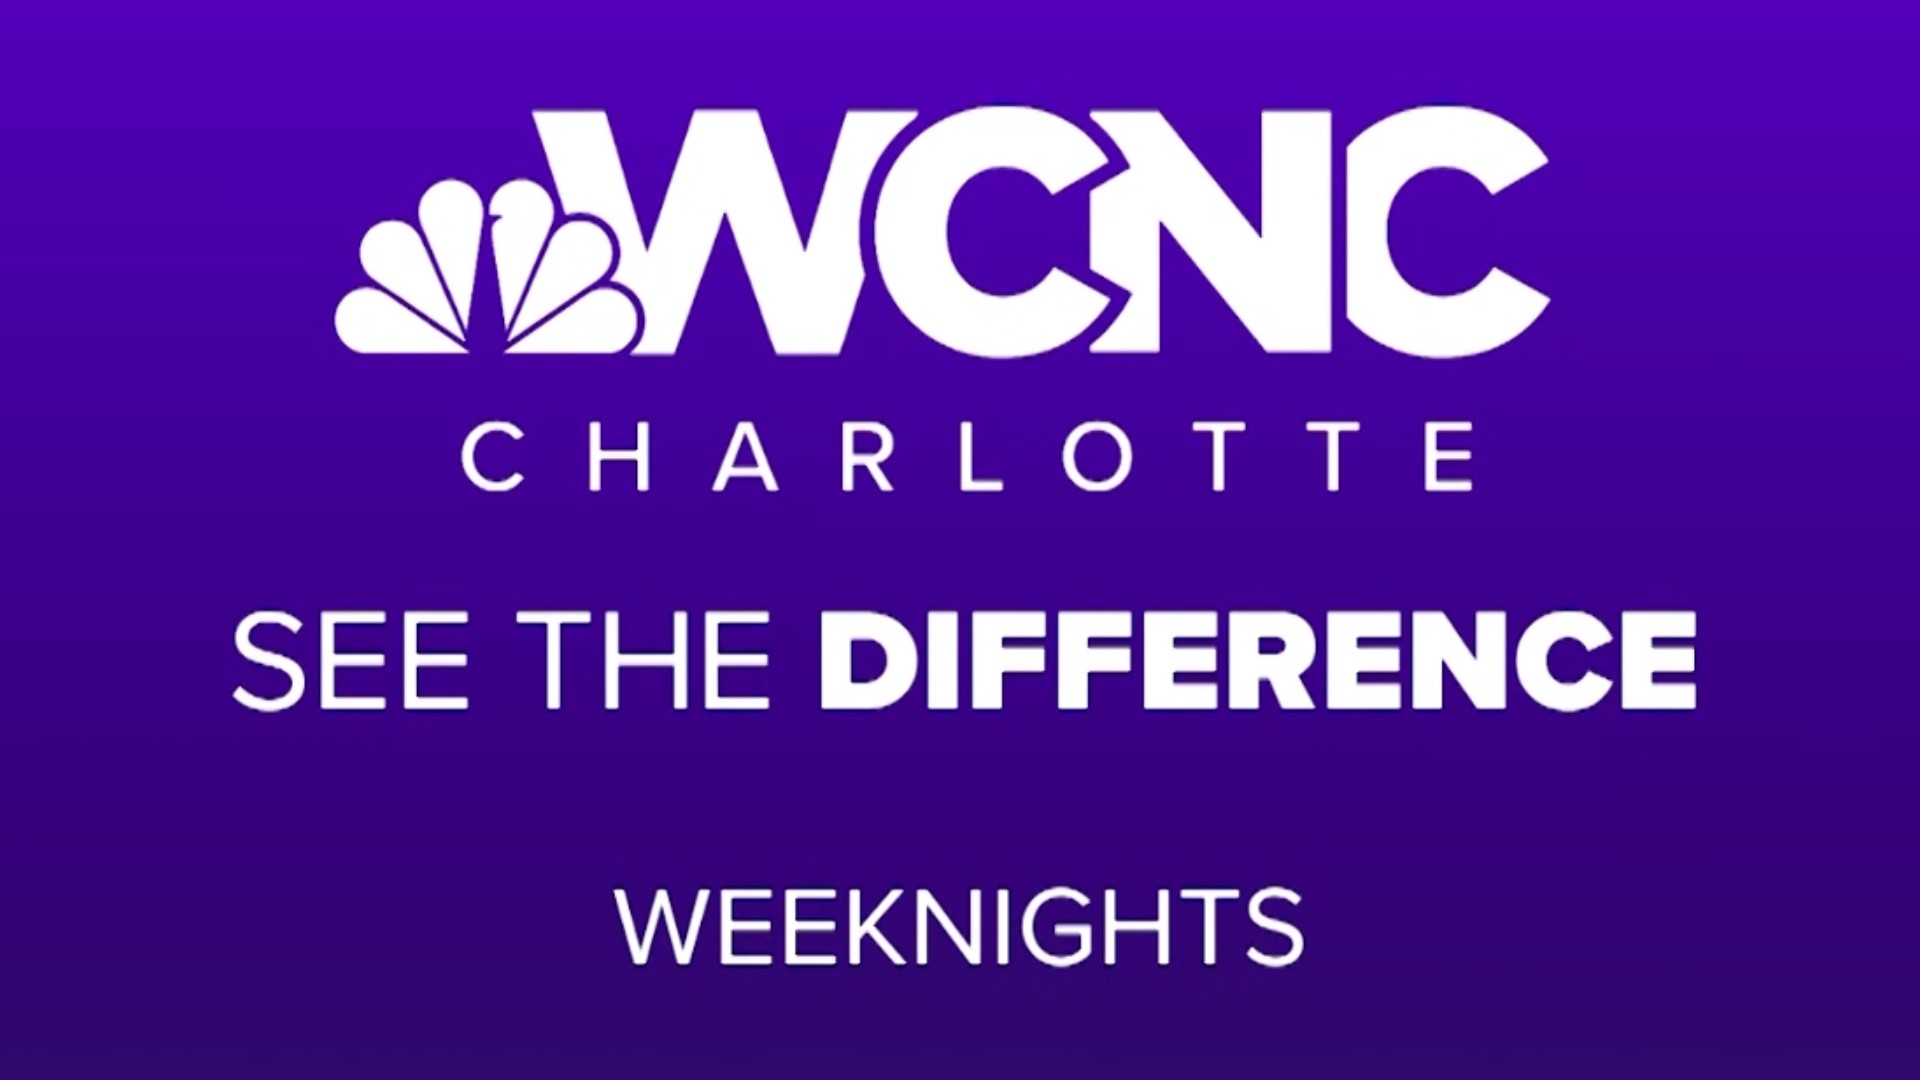 WCNC Charlotte is dedicated to making a difference in our community, seeking solutions, verifying information and keep you weather aware.